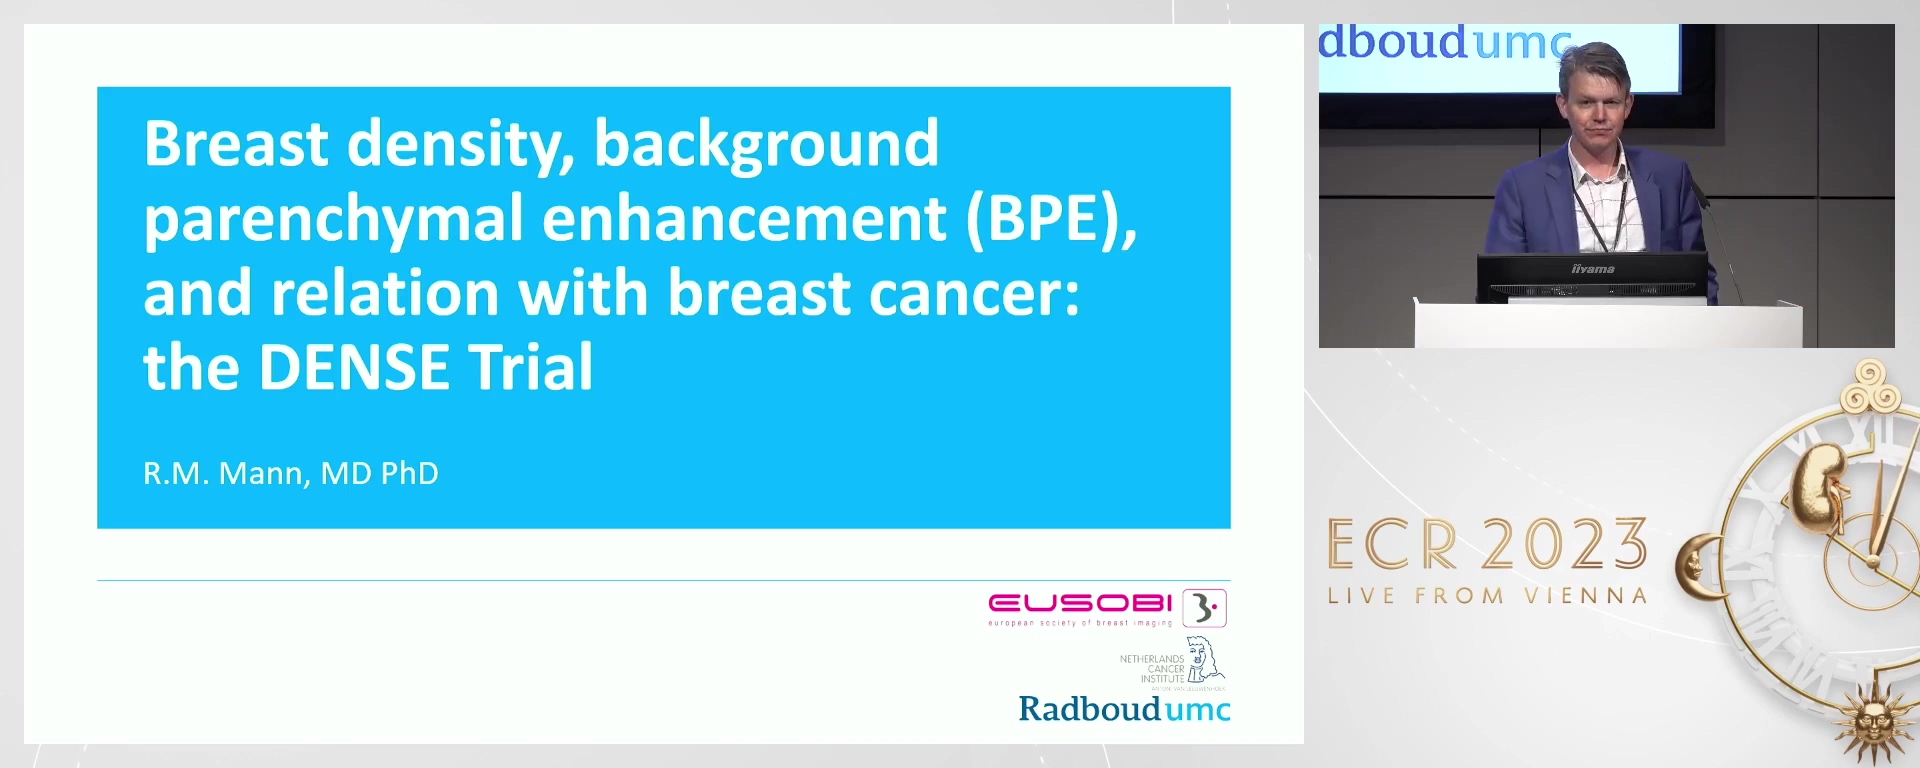 Breast density, background parenchymal enhancement (BPE), and relation with breast cancer: the DENSE Trial